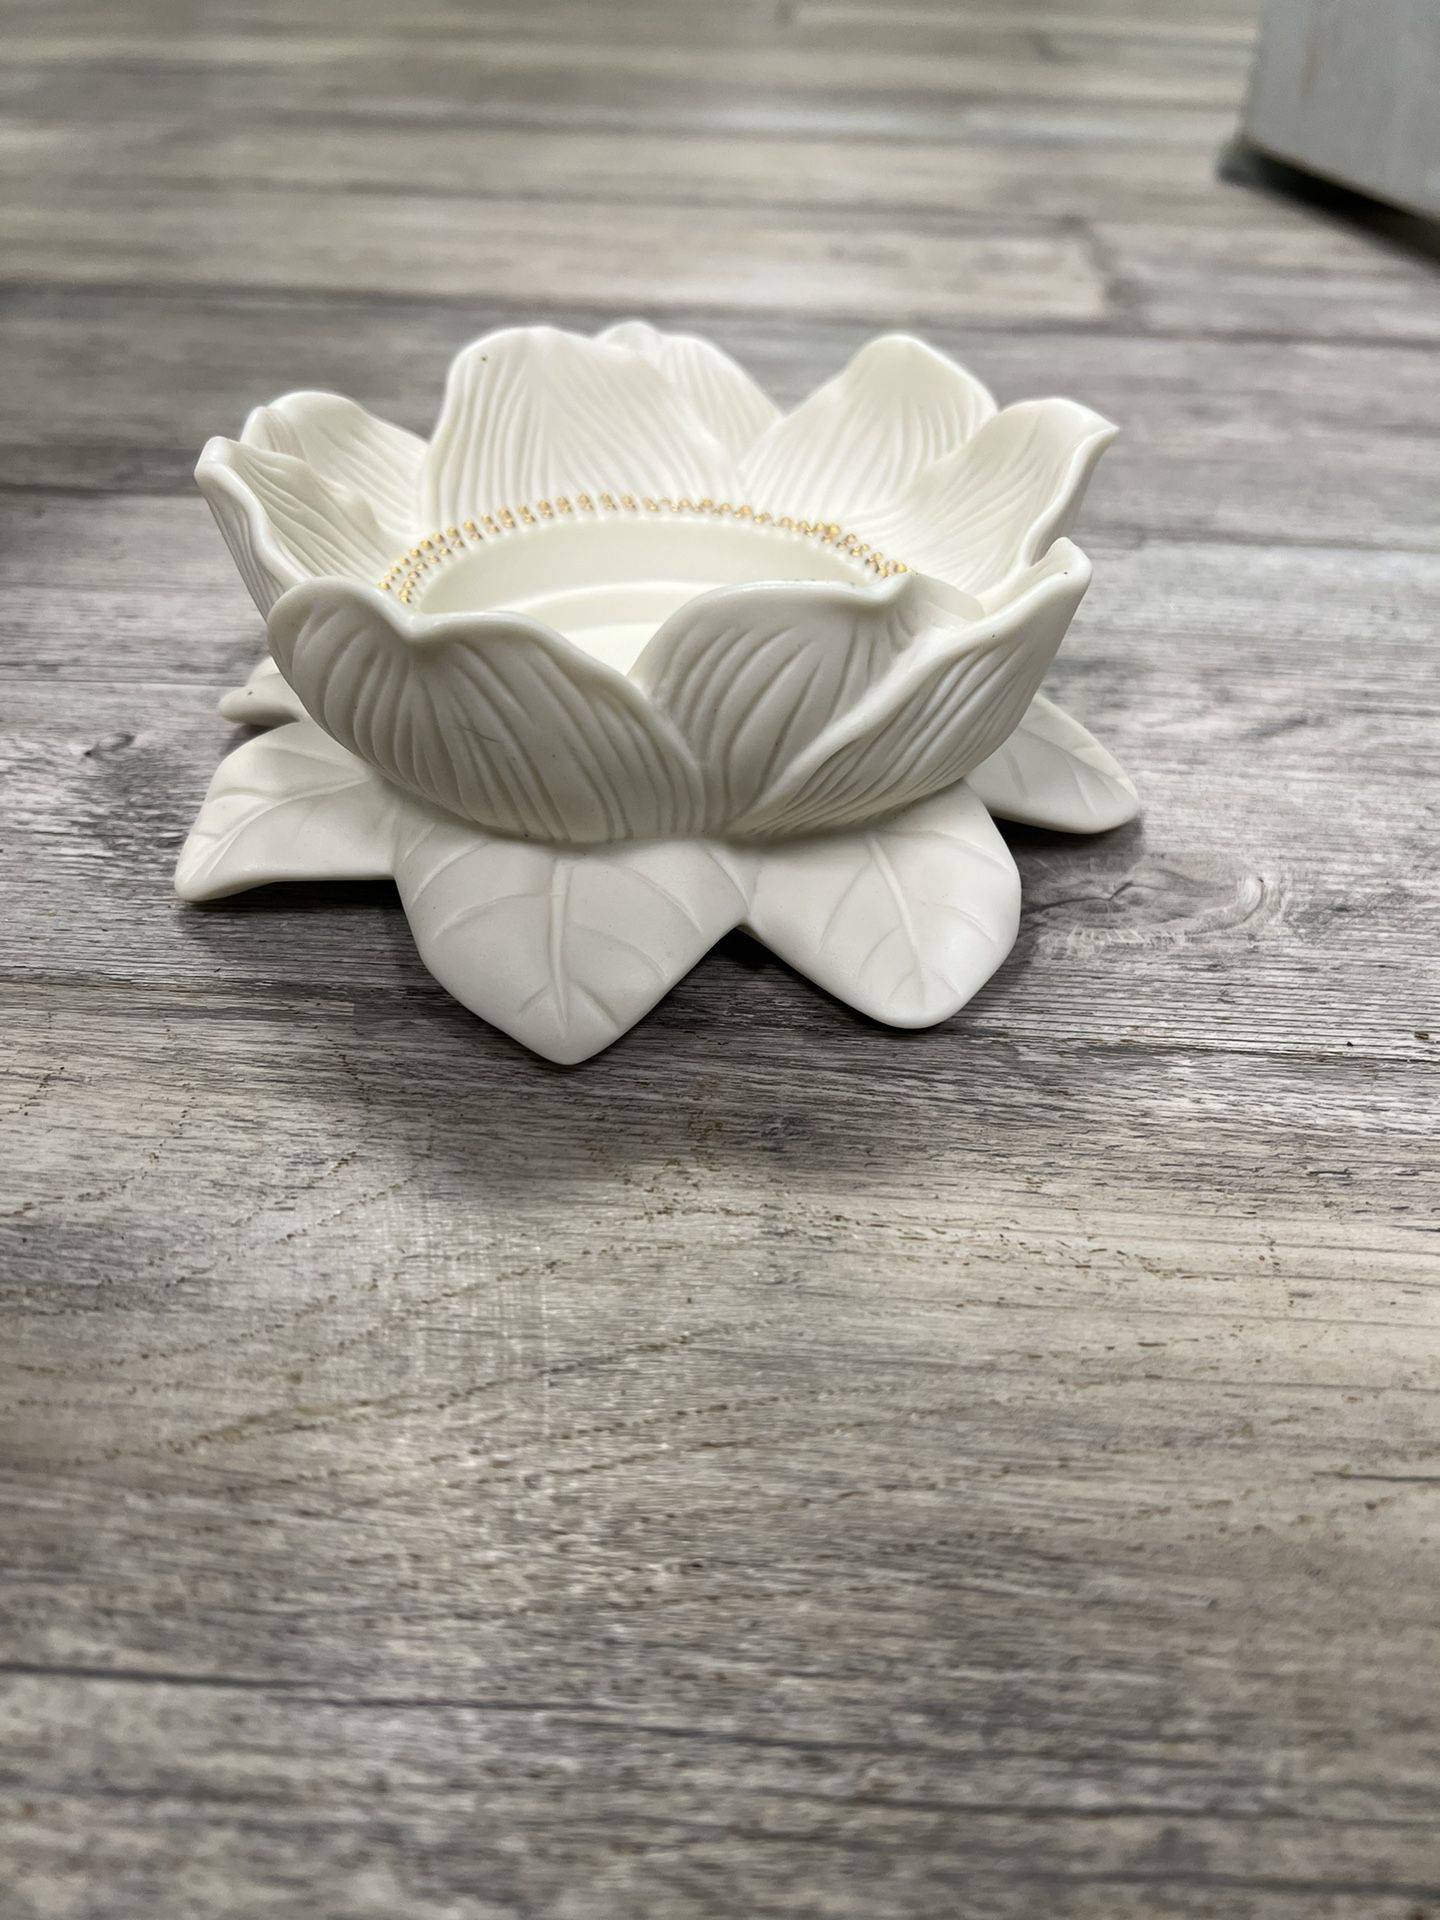 PARTYLITE Magnolia Lotus Flower Blossom Pillar Candle Holder P7369 without Box